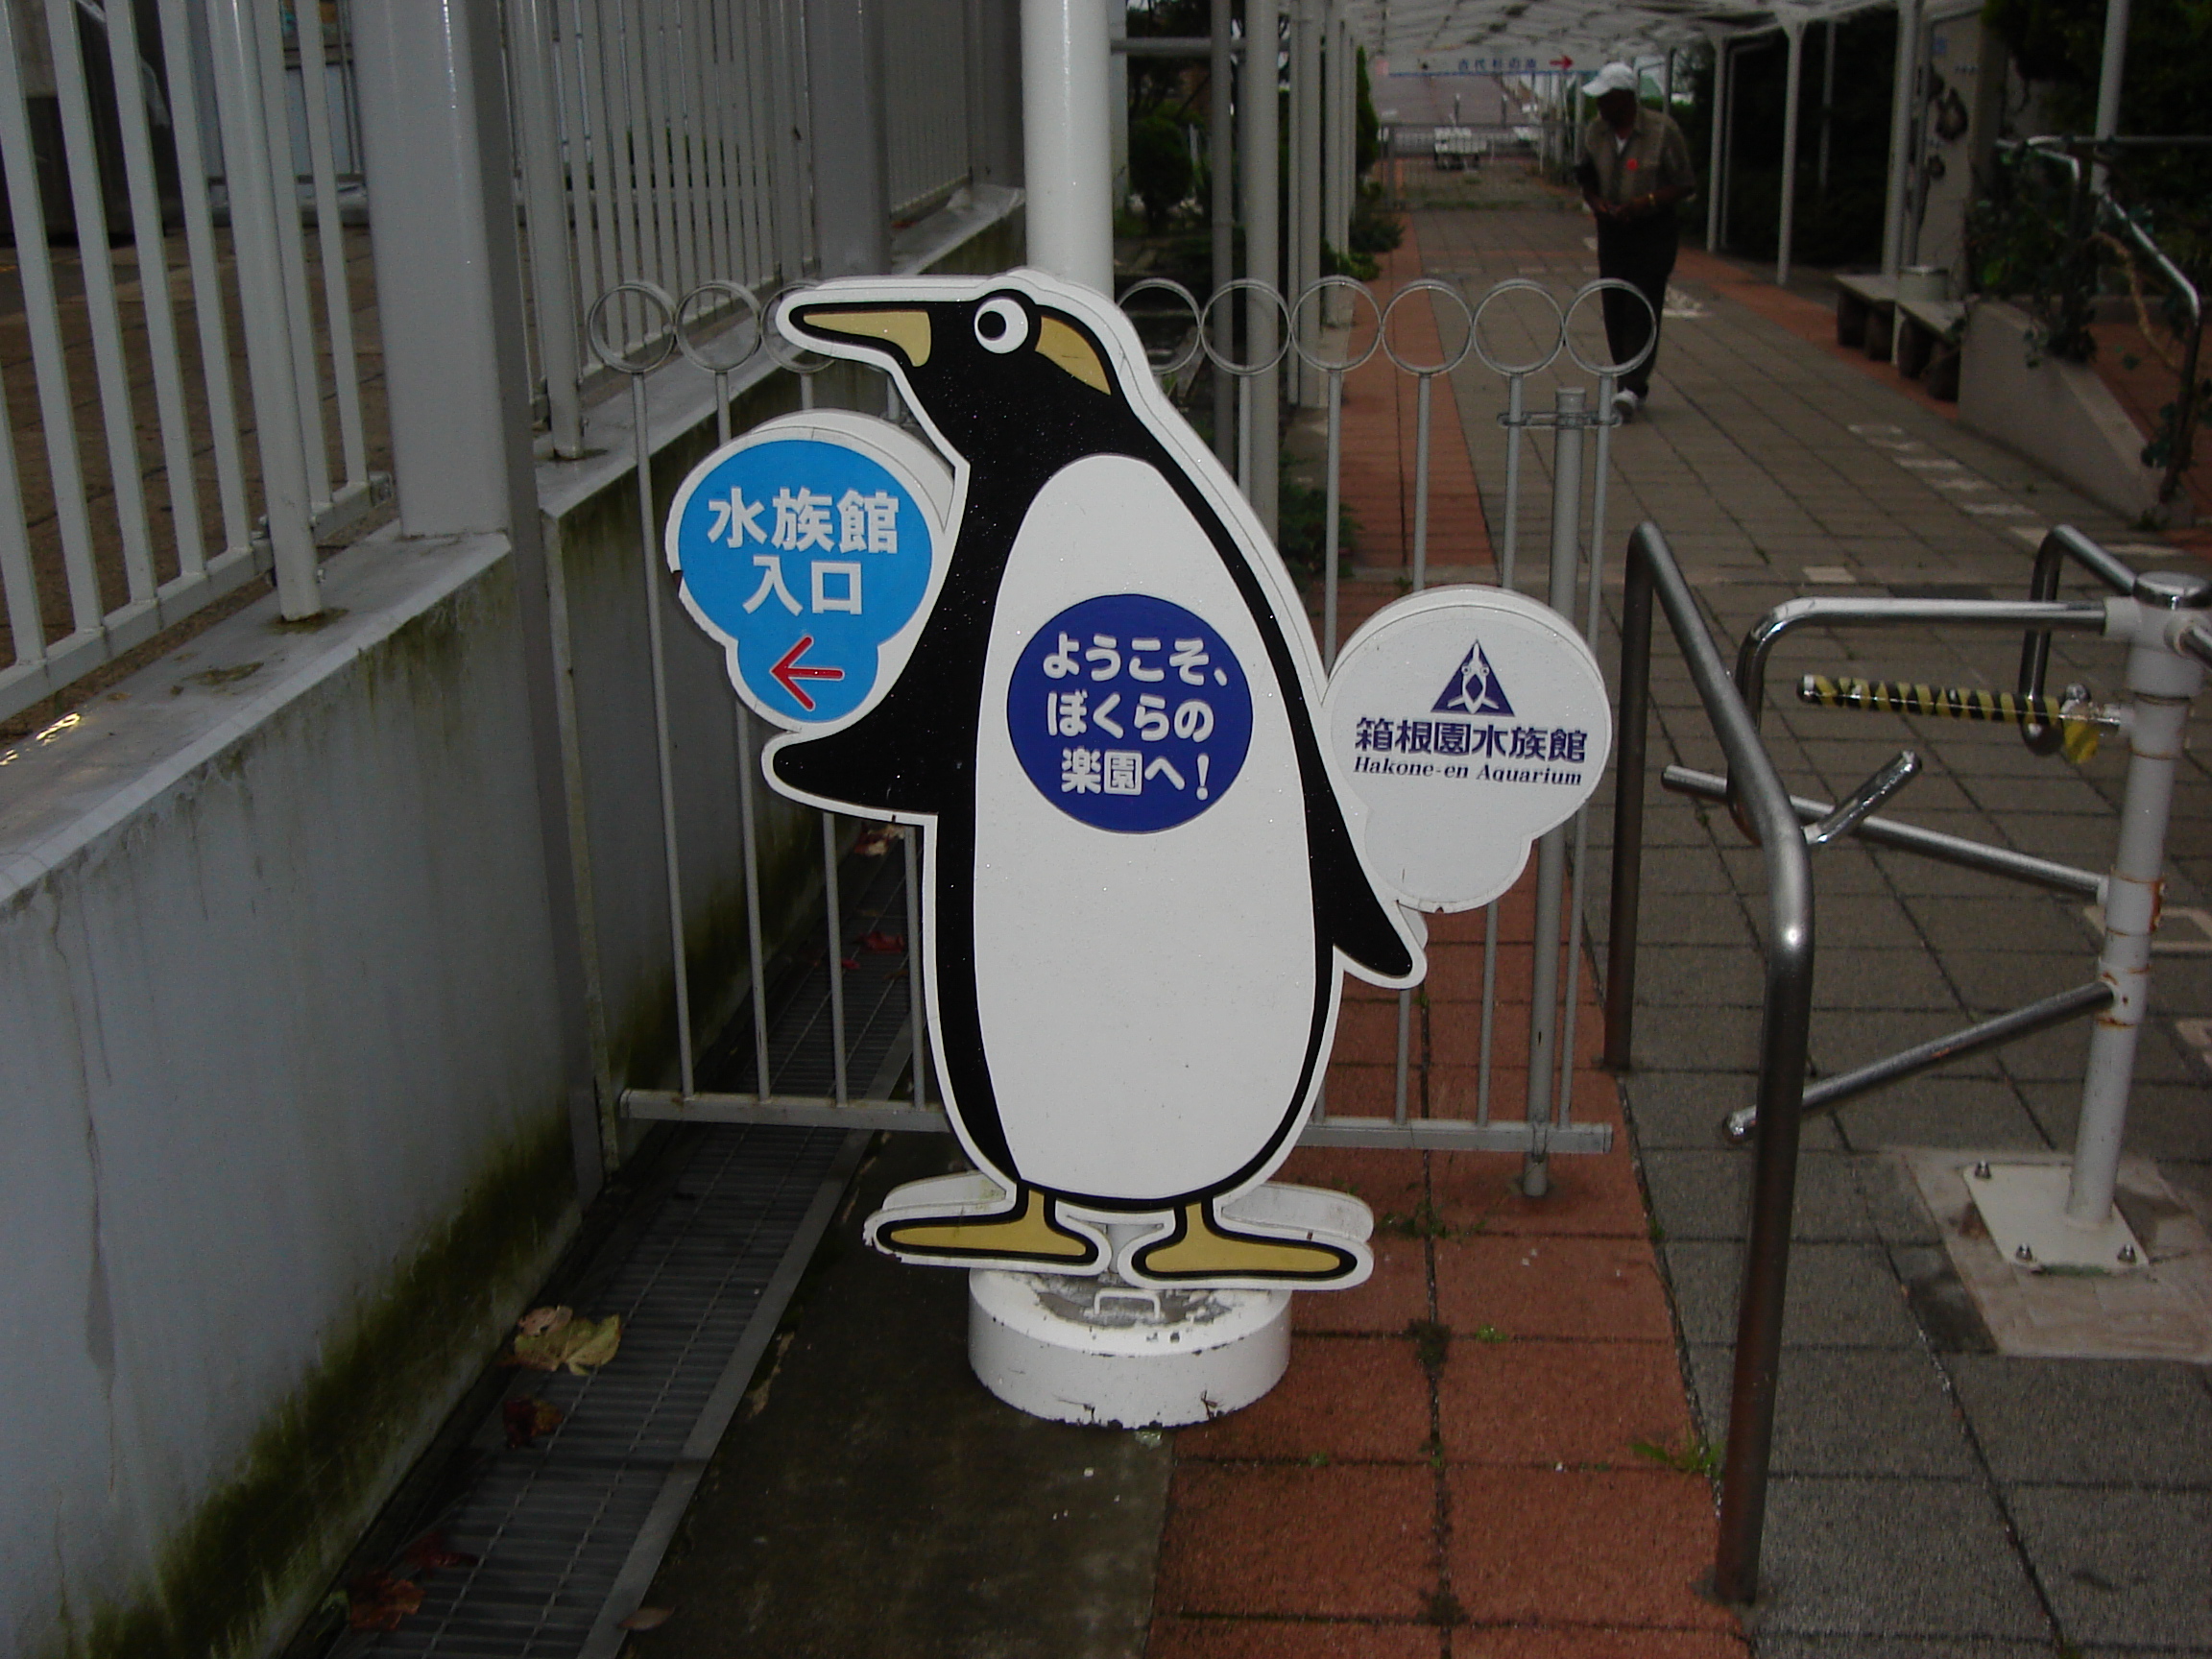 a cartoon penguin sign points the way